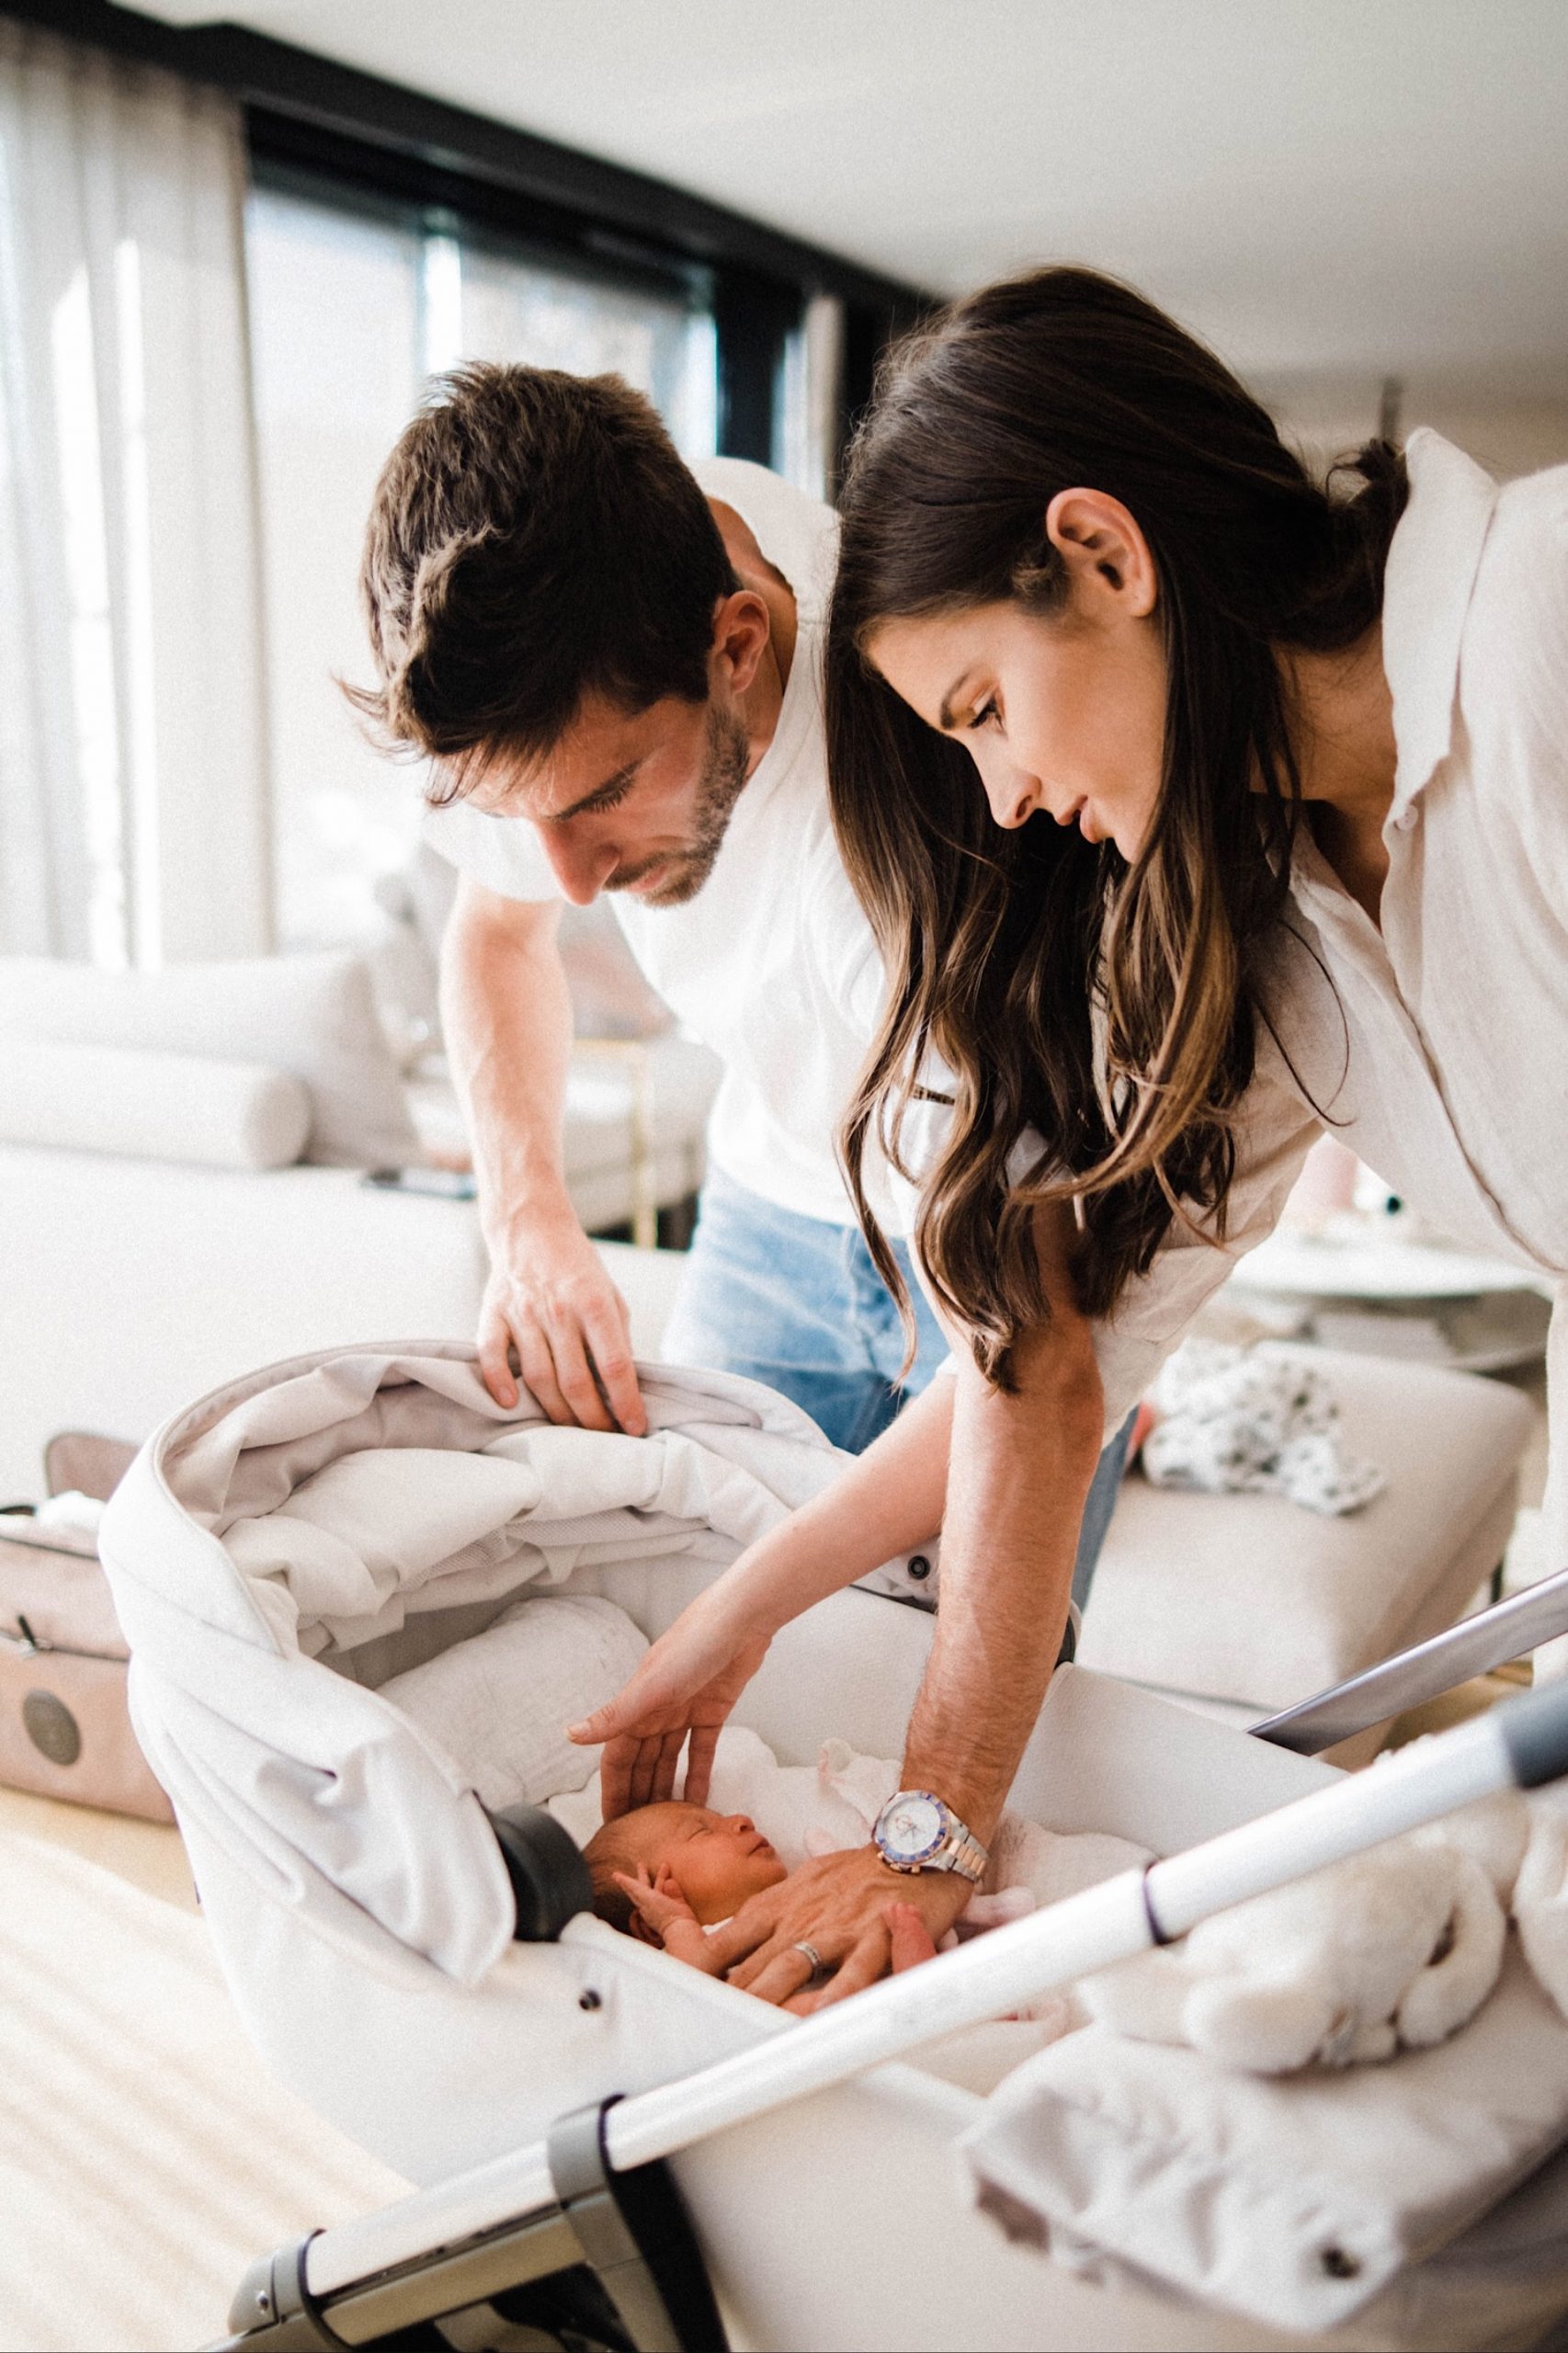 A portrait image of a Mum and Dad calming their newborn who's lying in her Stokke stroller.